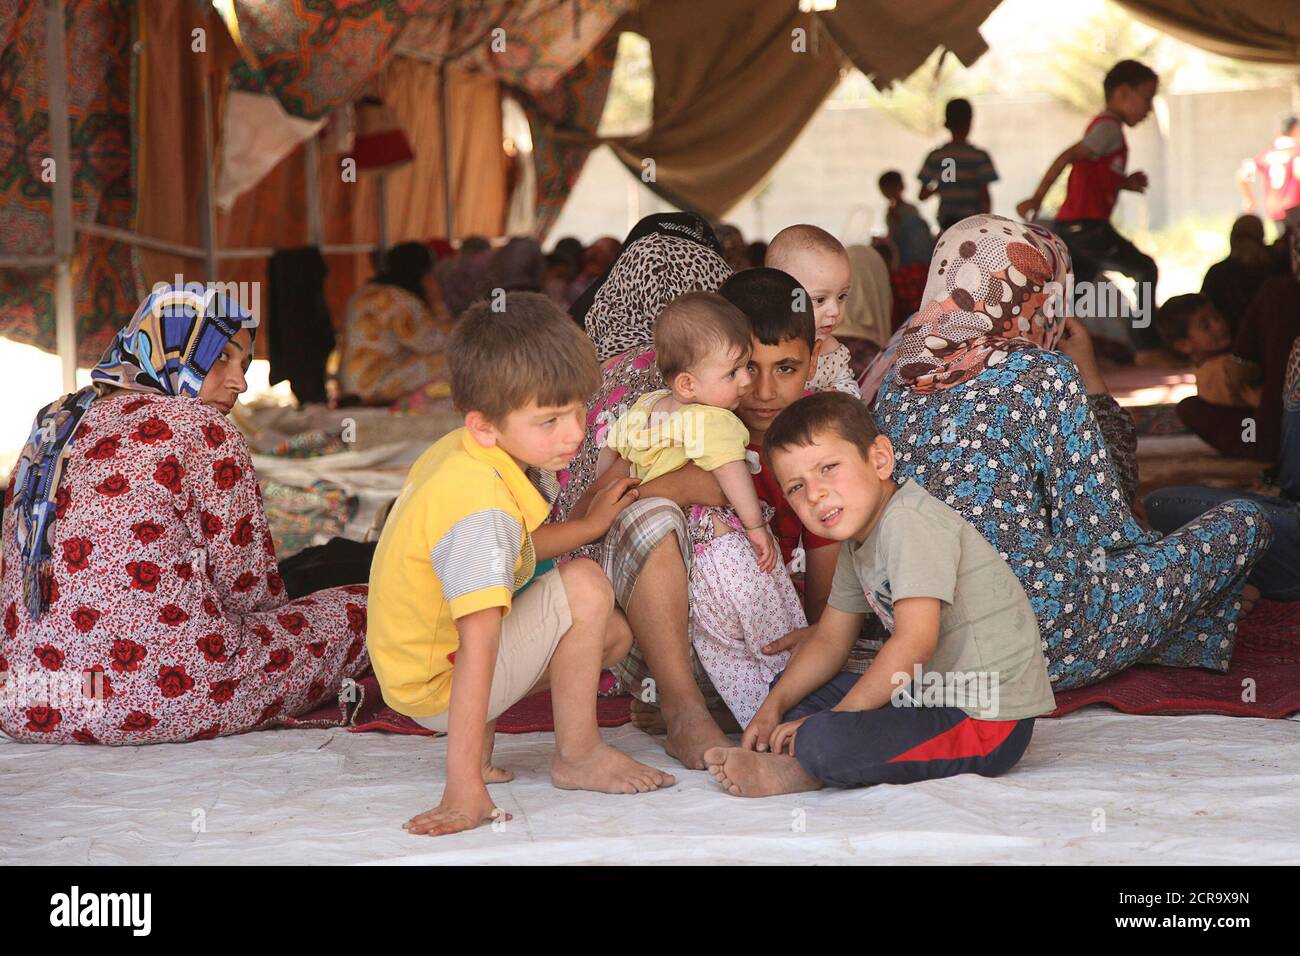 iraqi-shiite-turkmen-families-fleeing-the-violence-in-the-iraqi-city-of-tal-afar-west-of-mosul-arrive-at-shangal-a-town-in-nineveh-province-june-17-2014-the-mainly-turkmen-city-of-tal-afar-west-of-mosul-fell-to-sunni-militants-late-on-sunday-and-the-iraqi-military-said-it-was-sending-reinforcement-there-the-iraqi-army-said-on-state-television-it-had-killed-a-top-militant-named-abu-abdul-rahman-al-muhajir-in-mosul-in-clashes-picture-taken-june-17-2014-reuters-ari-jalal-iraq-tags-civil-unrest-politics-tpx-images-of-the-day-2CR9X9N.jpg